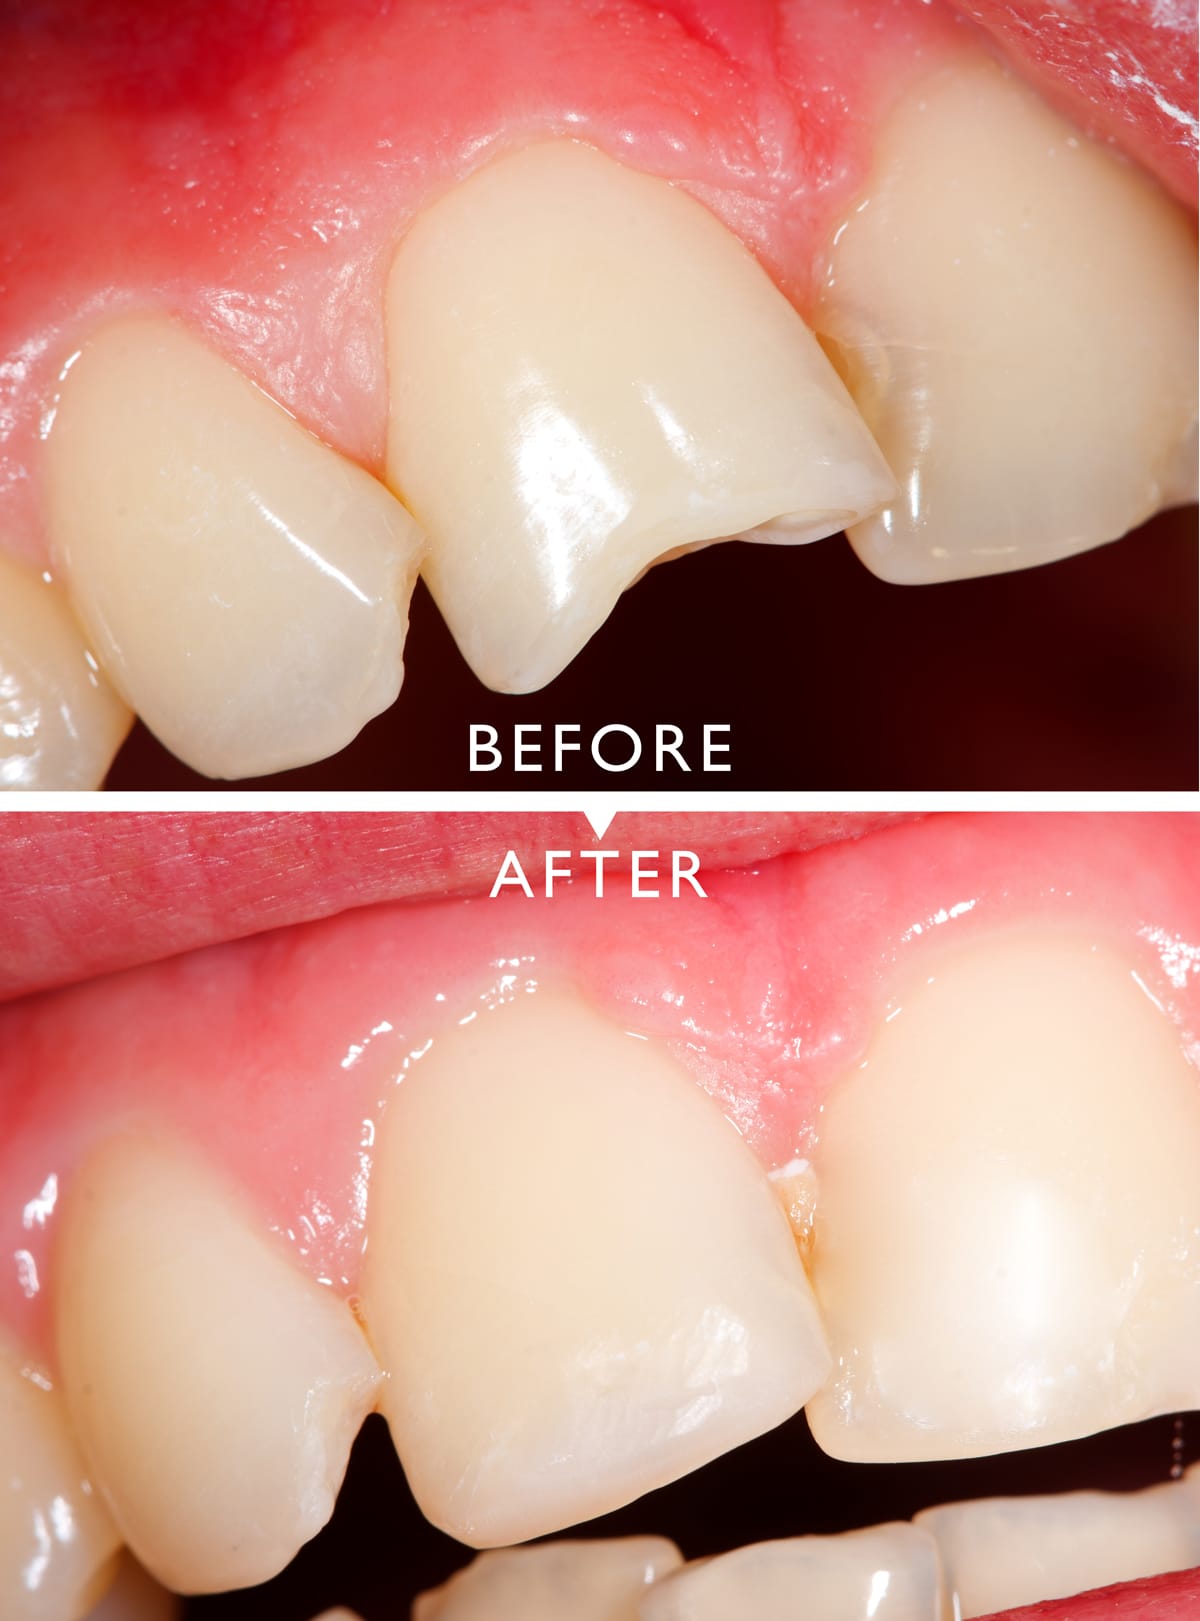 Cracked or Chipped Teeth: Immediate Steps to Avoid Long-Term Damage